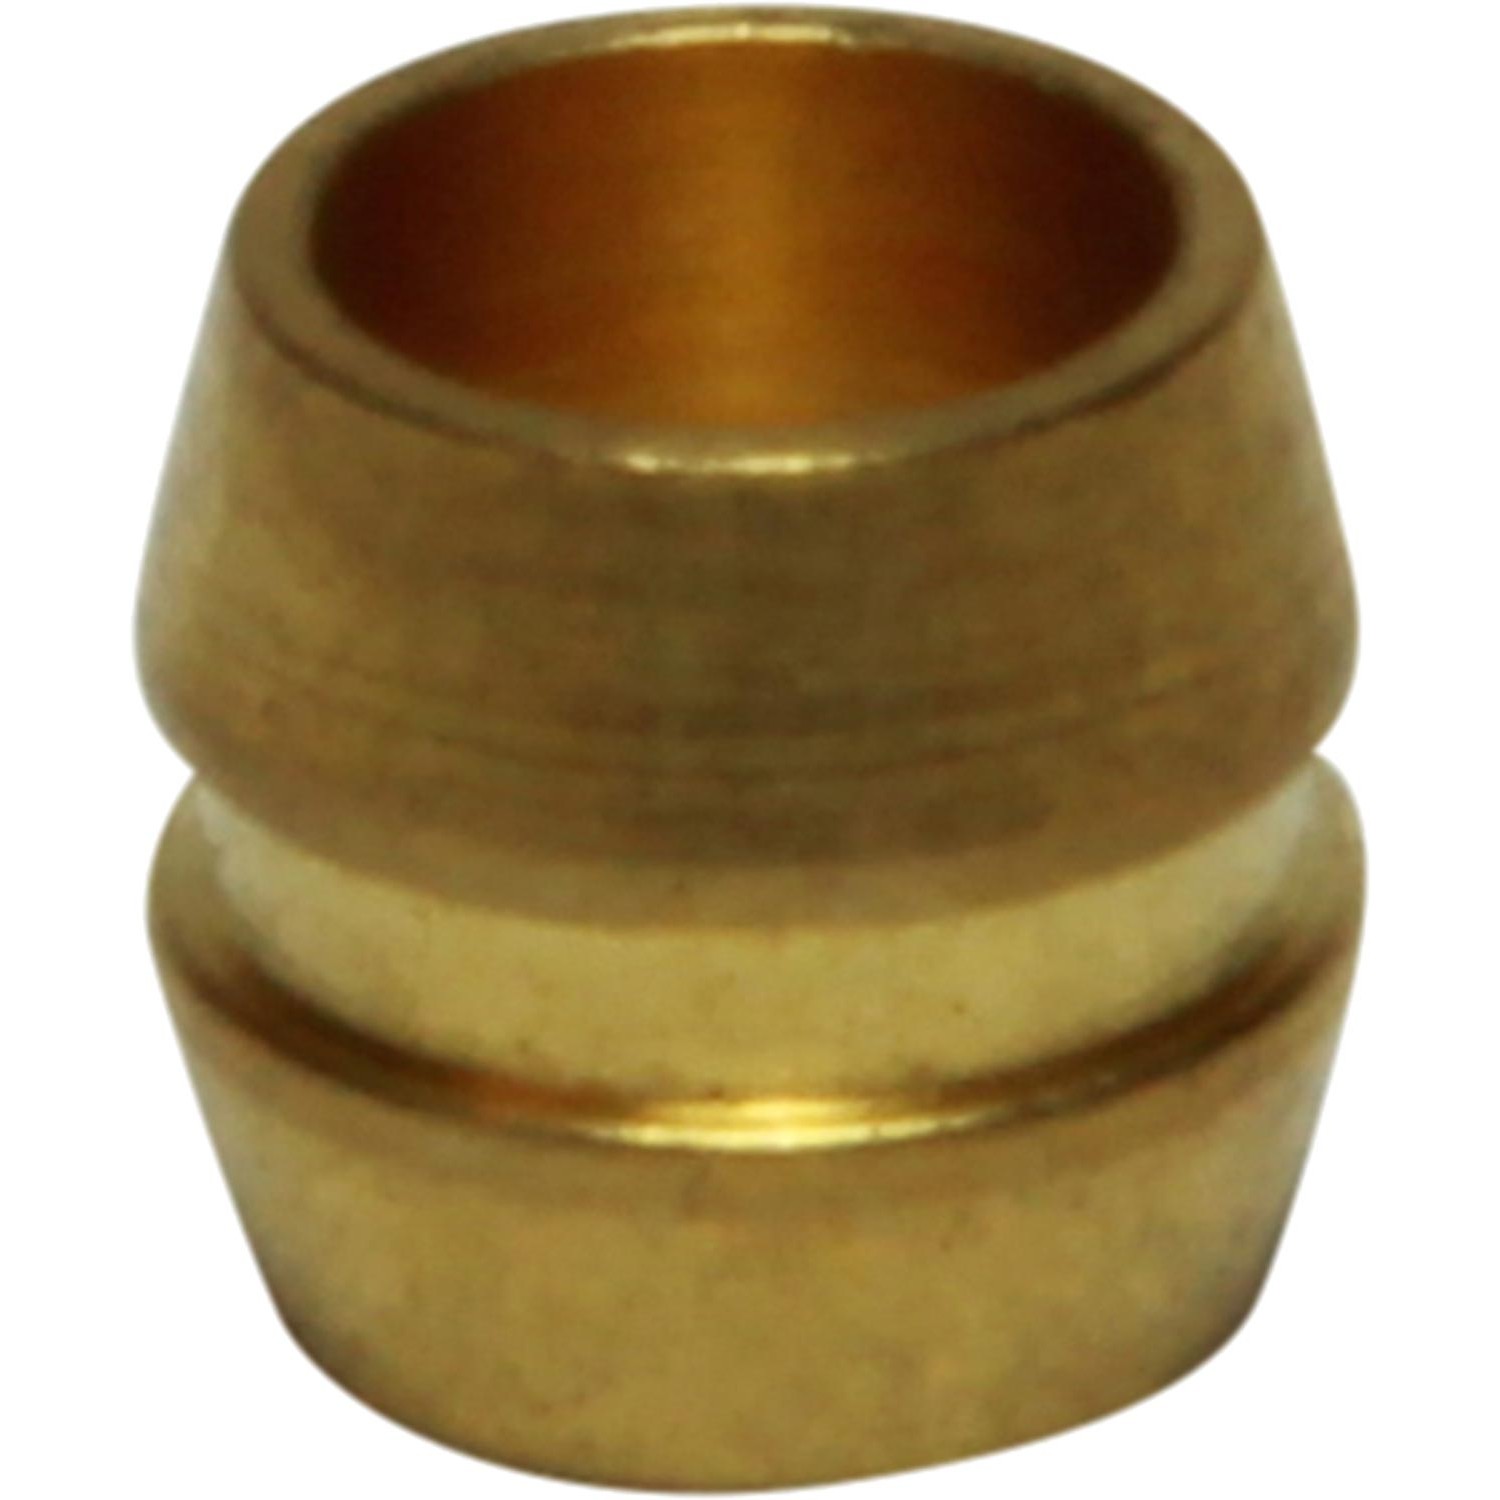 10 x 3/16 Brass Olive Barrel Plumbing Olives Compression Fitting Copper Pipe Gas 